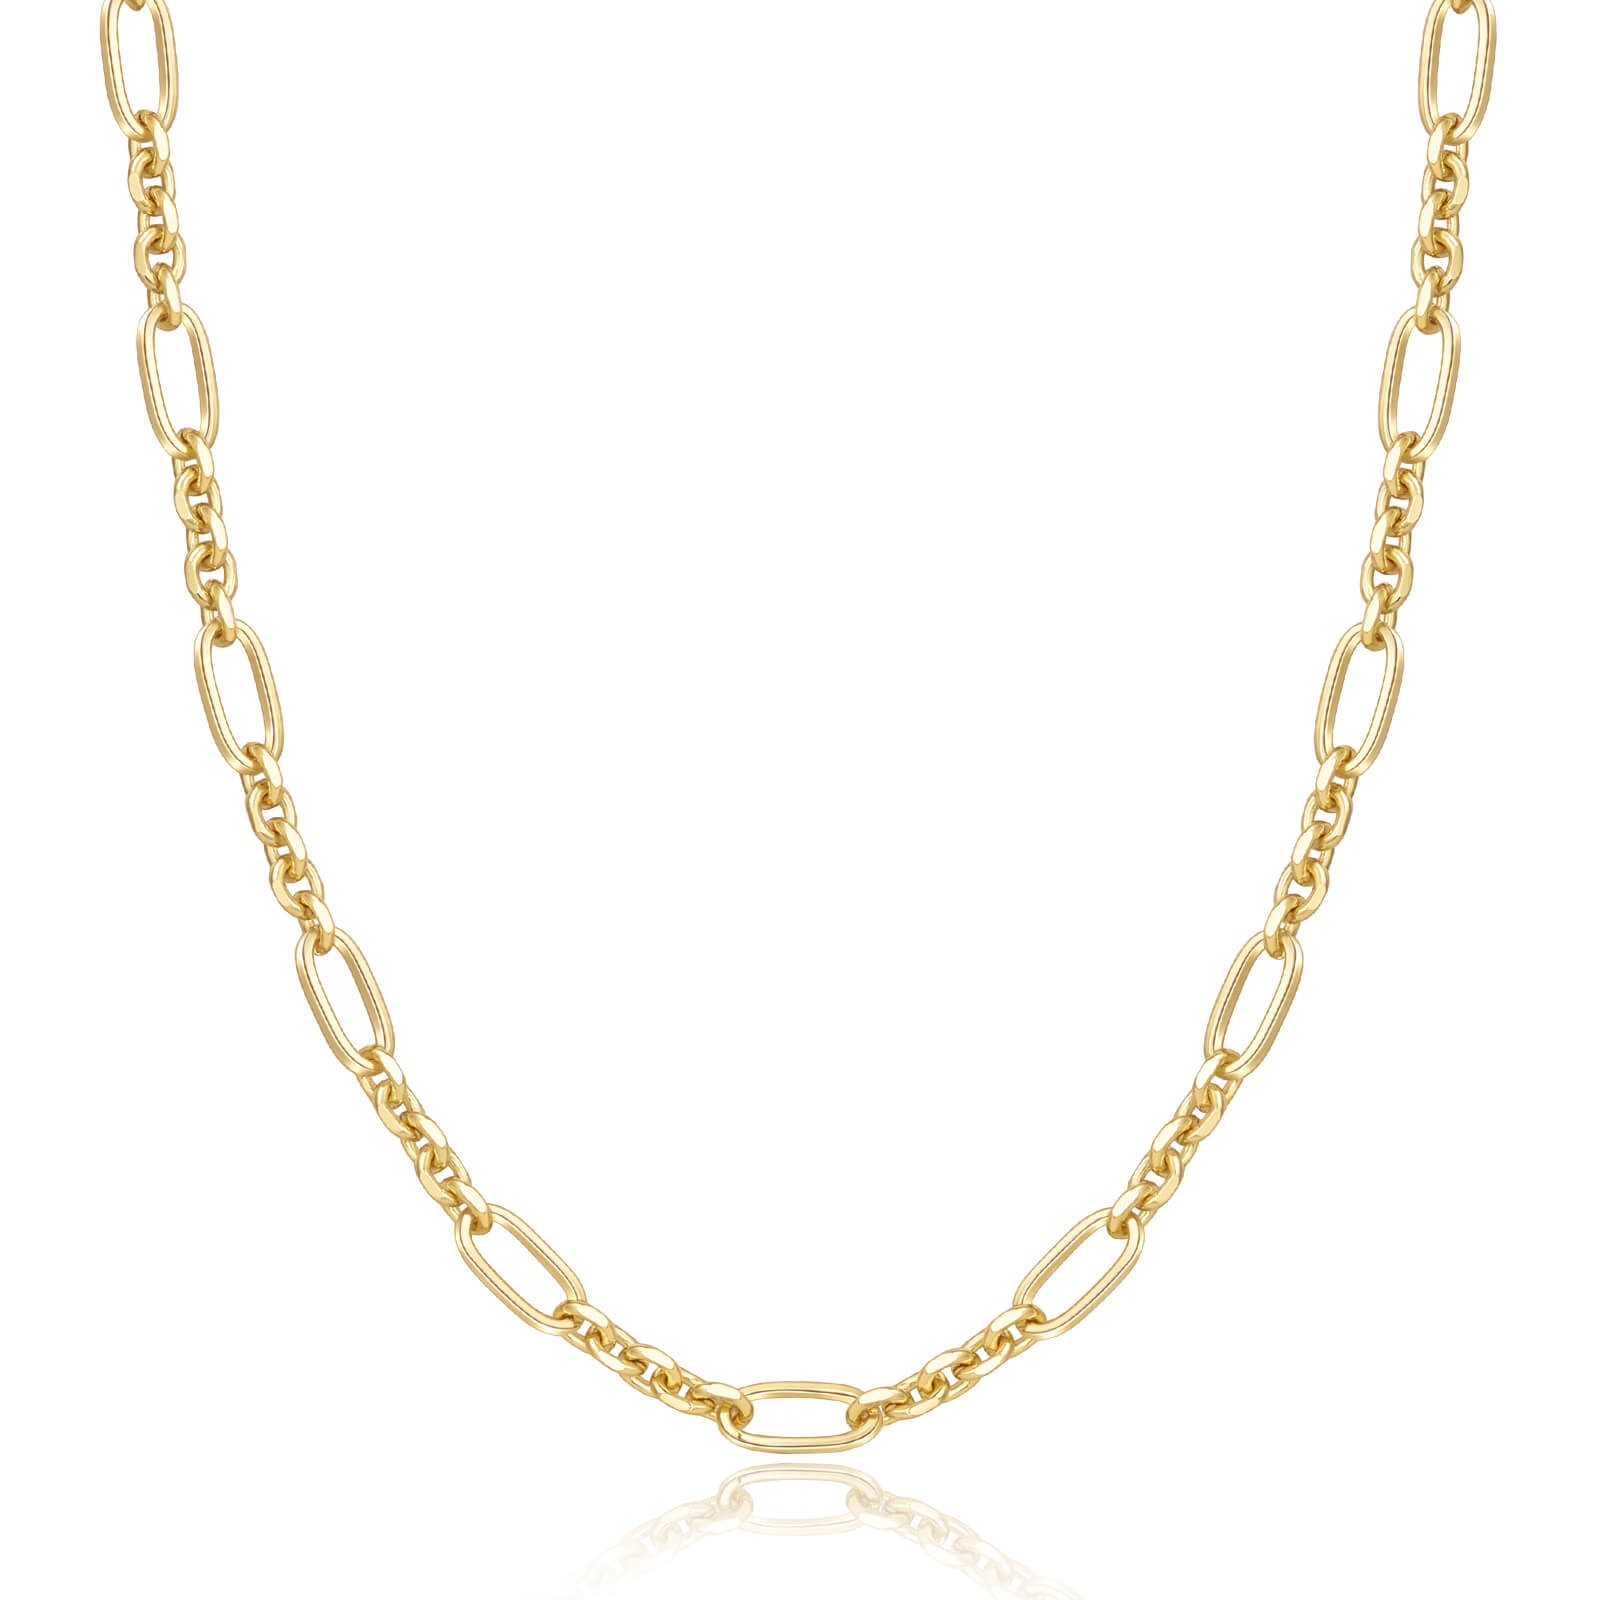 14K Gold Plated Textured Alternate Links Necklace